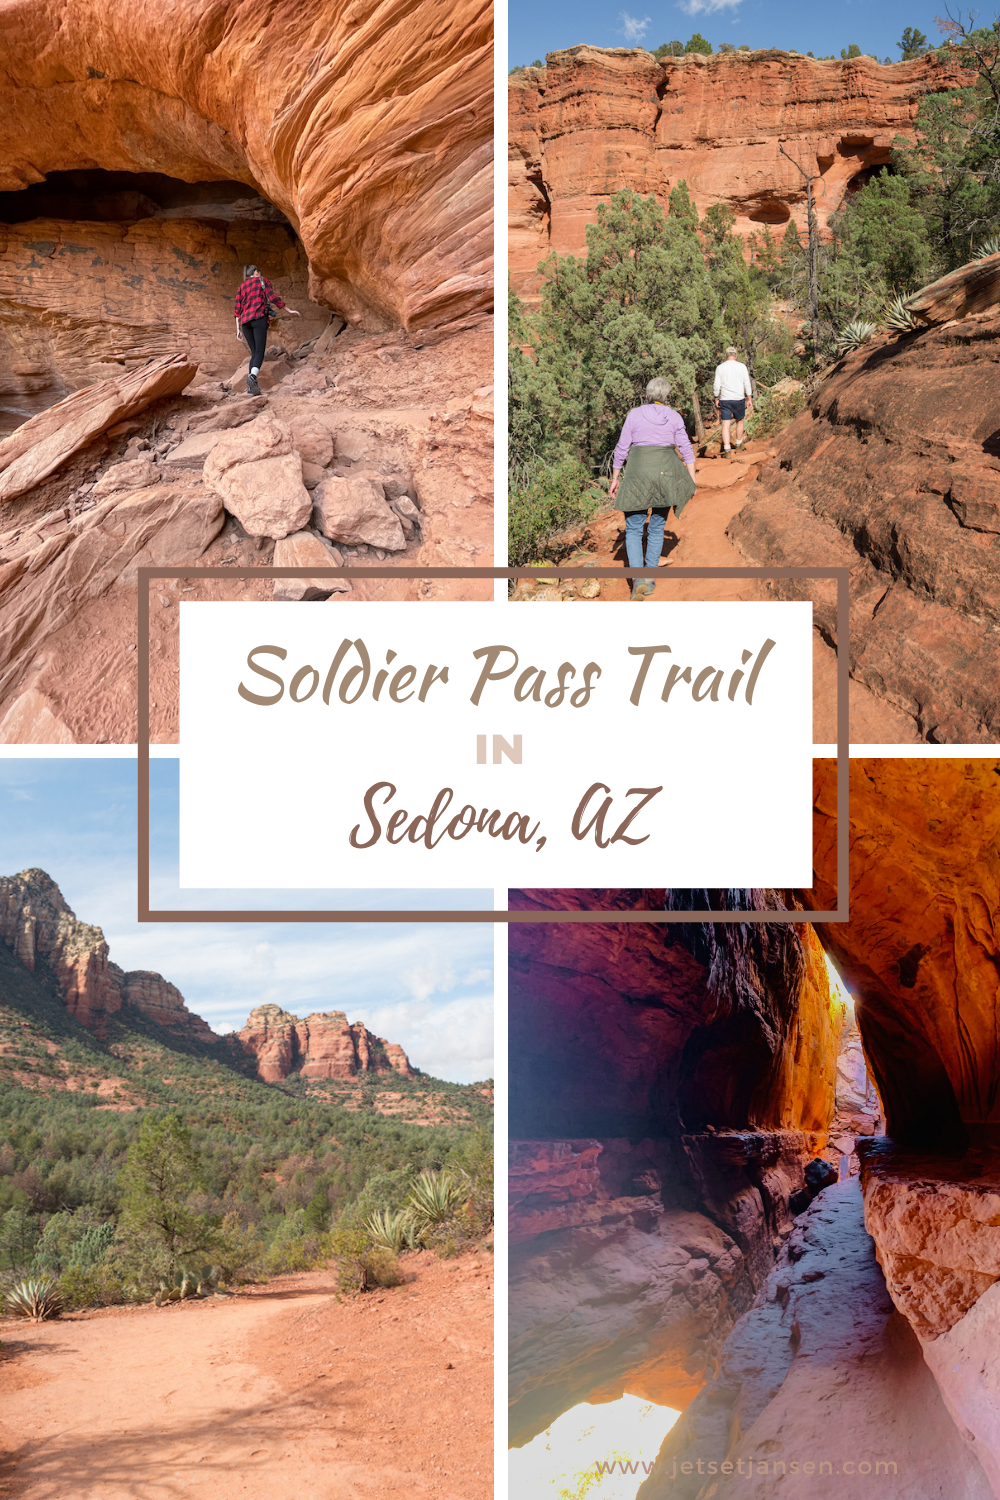 Hiking guide for the Soldier Pass Trail in Sedona.